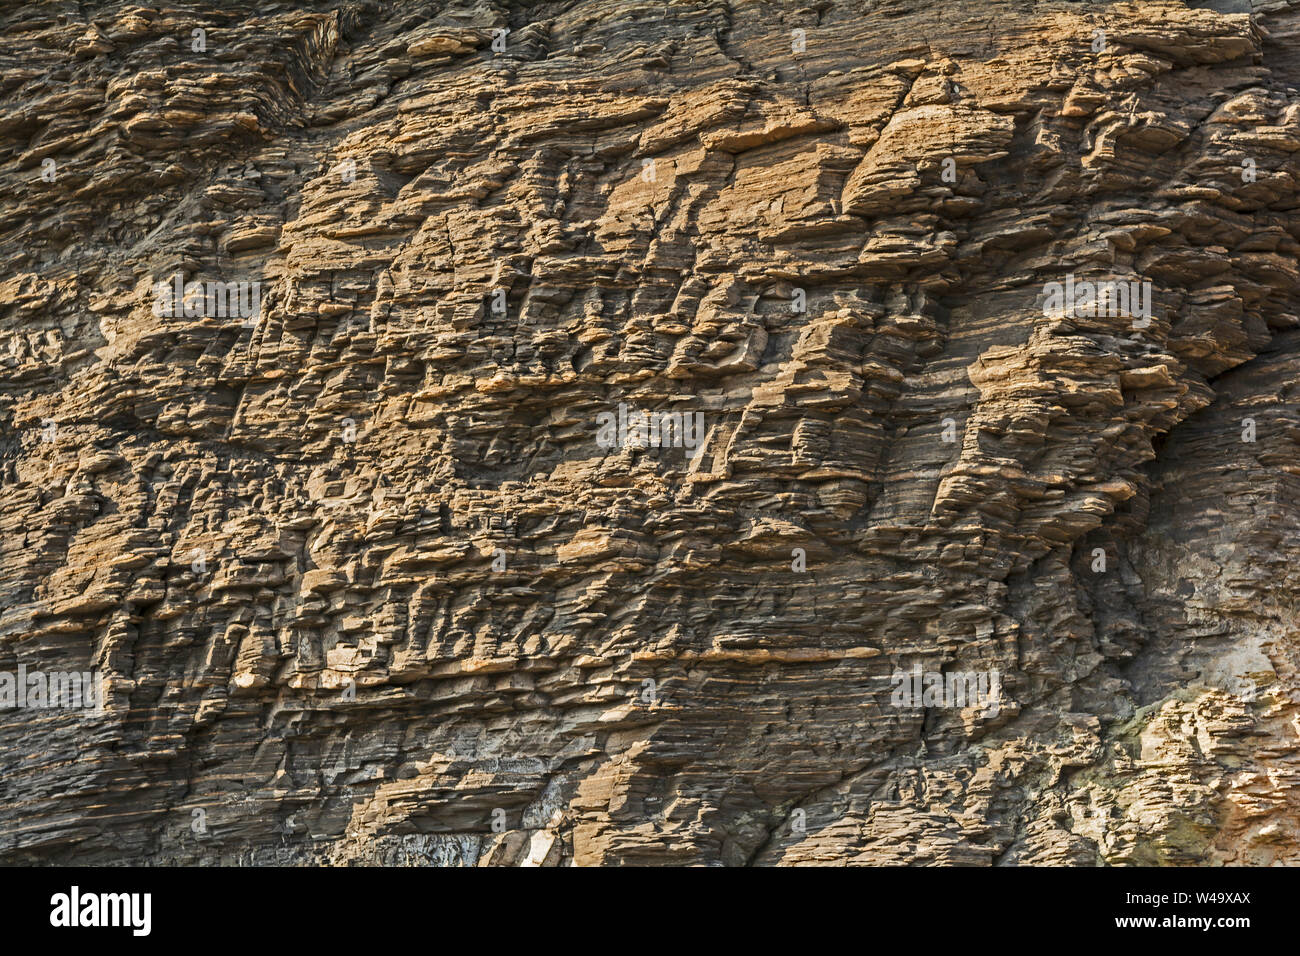 Fine textures on cliff rock face Stock Photo